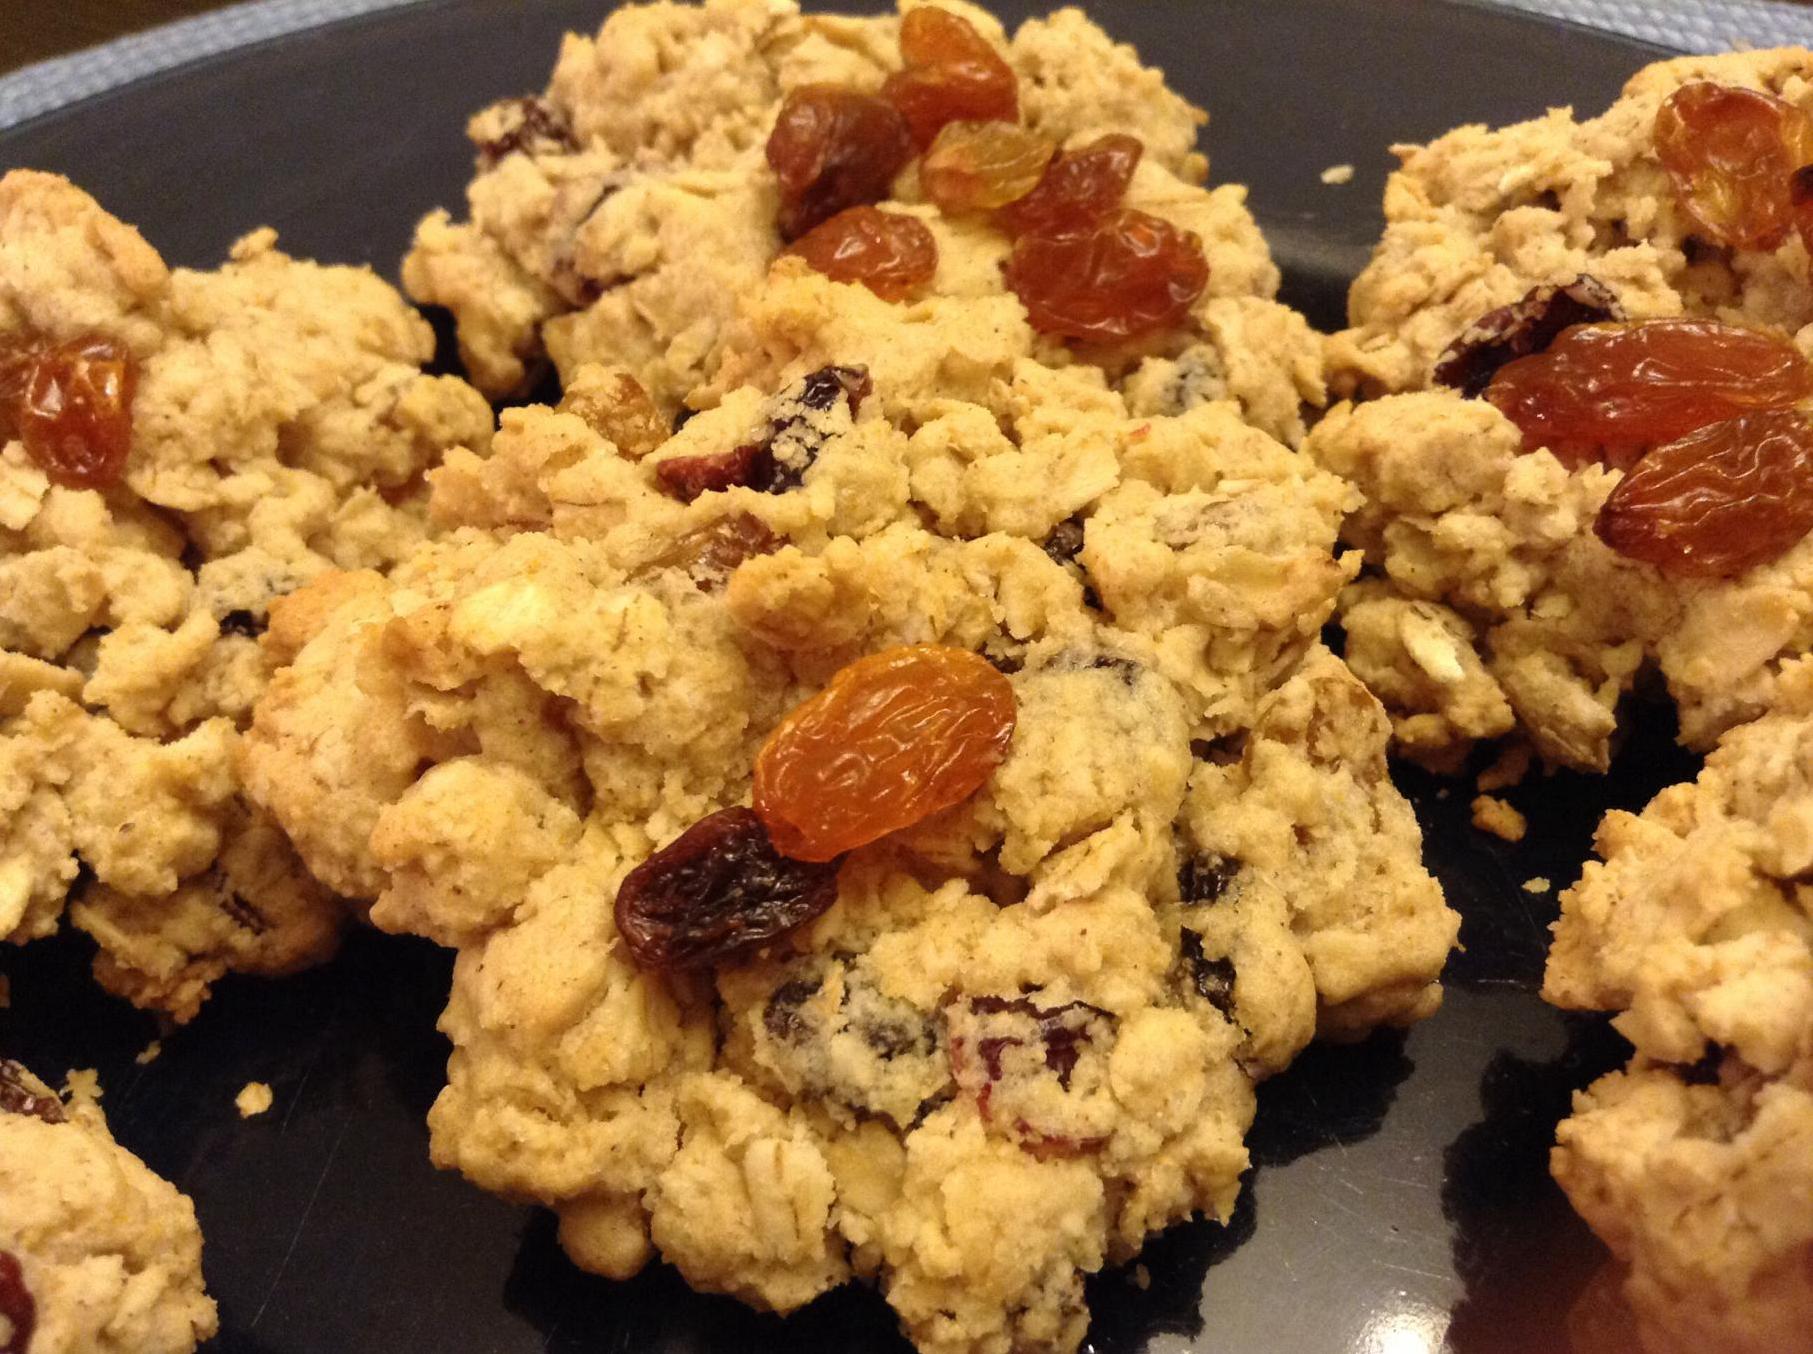 Delicious + Healthy: Starbucks Oatmeal Cookies Recipe